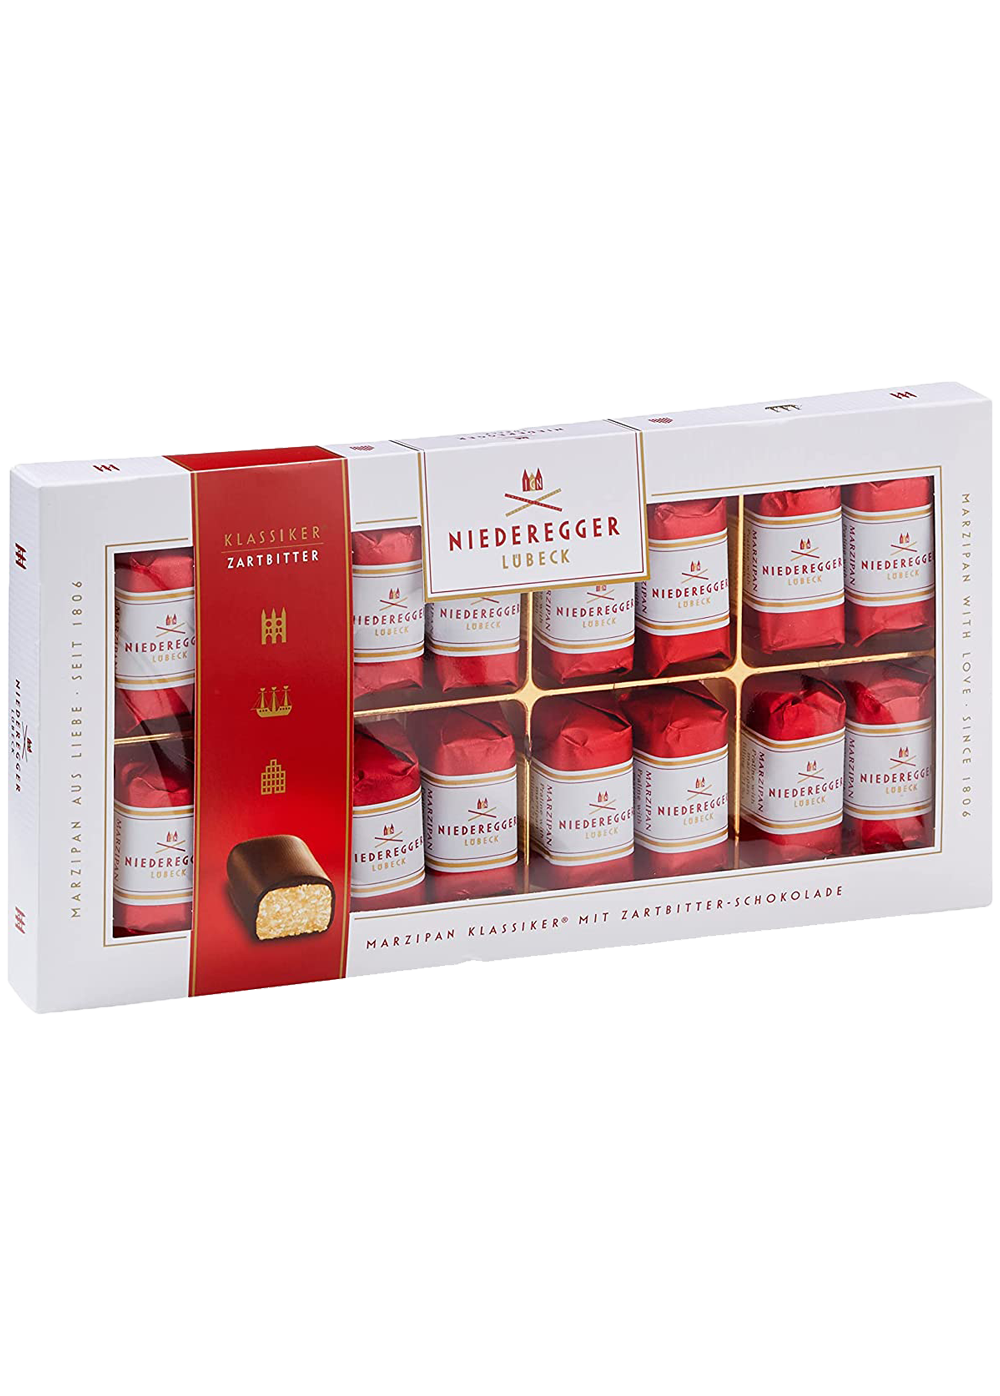 Niederegger Lubeck Praline with Marzipan filling (71%) in dark chocolate (Individuals Only)